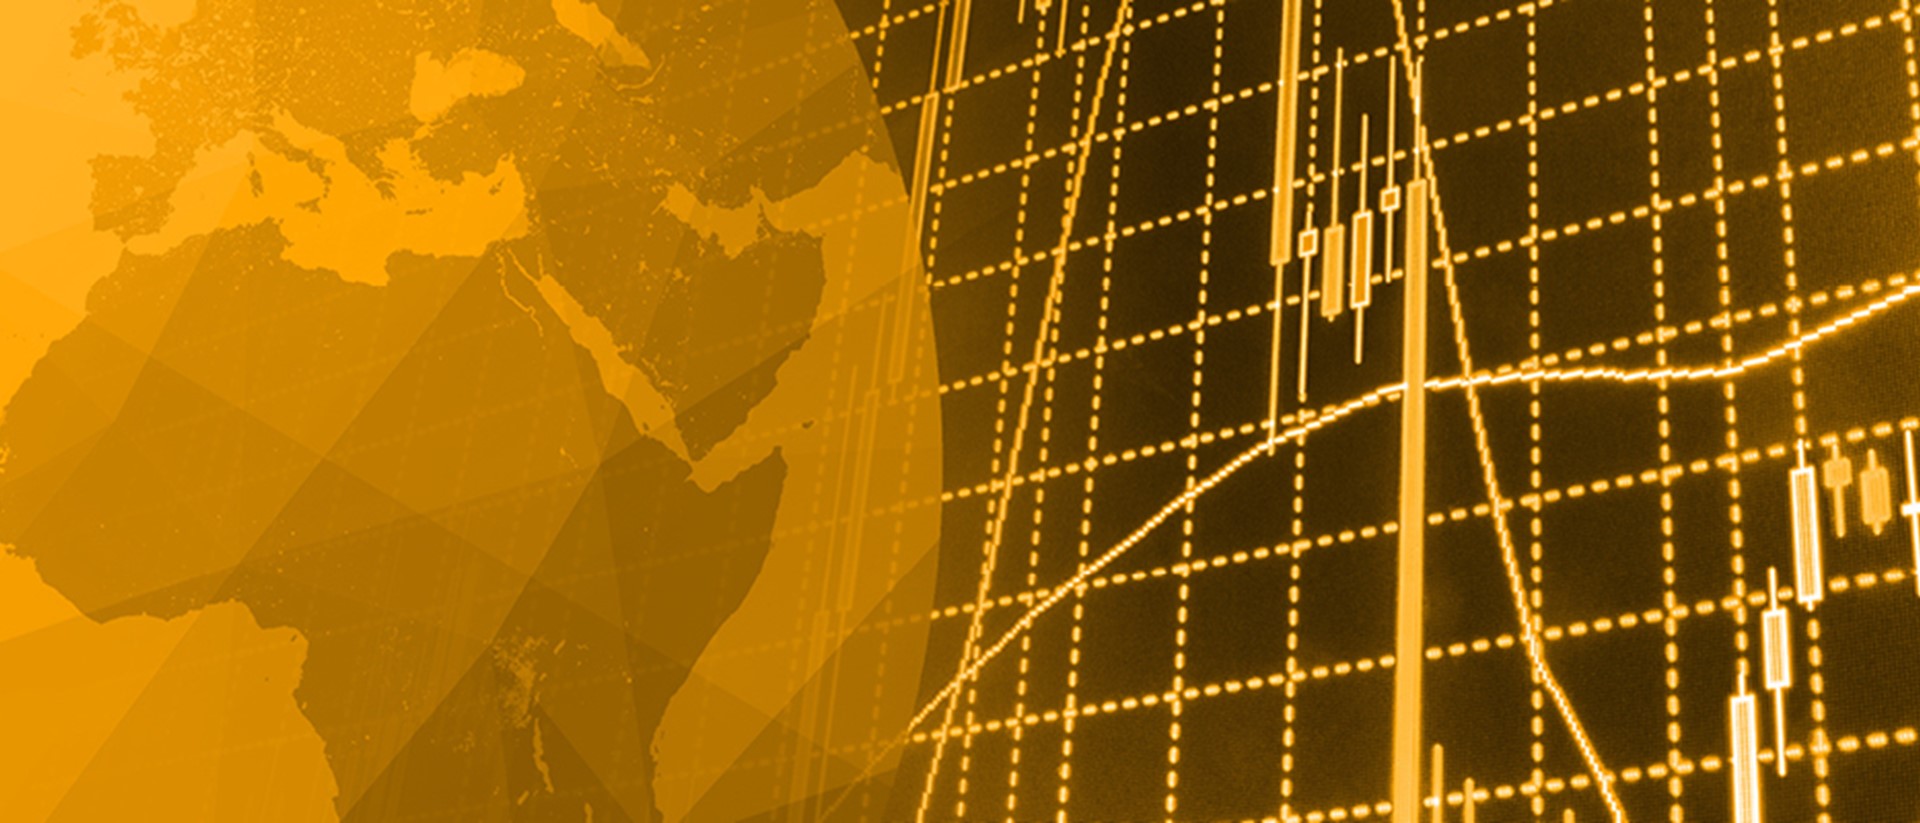 Image of an orange globe with investment charts on an orange background